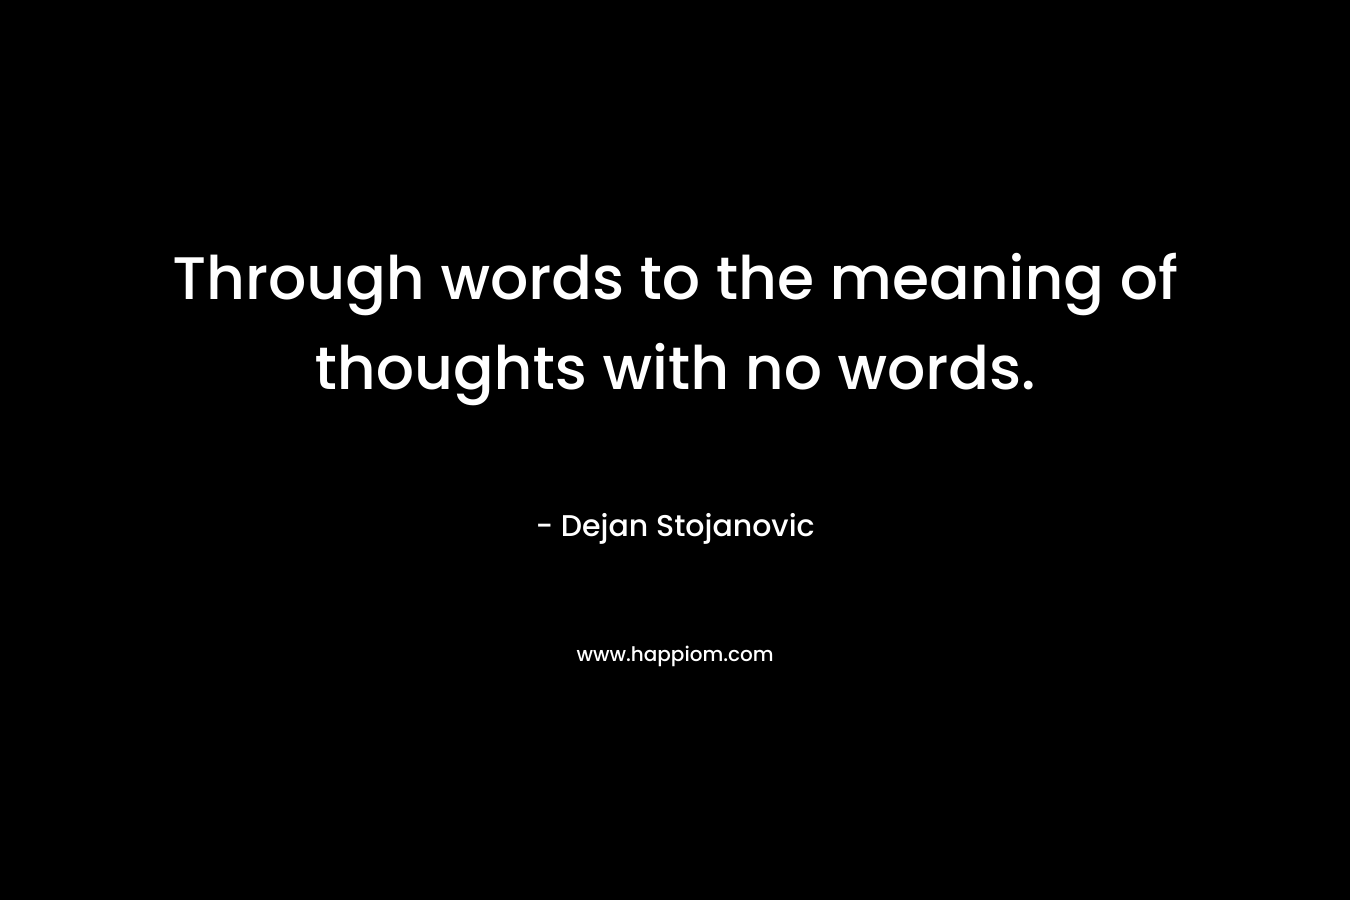 Through words to the meaning of thoughts with no words.